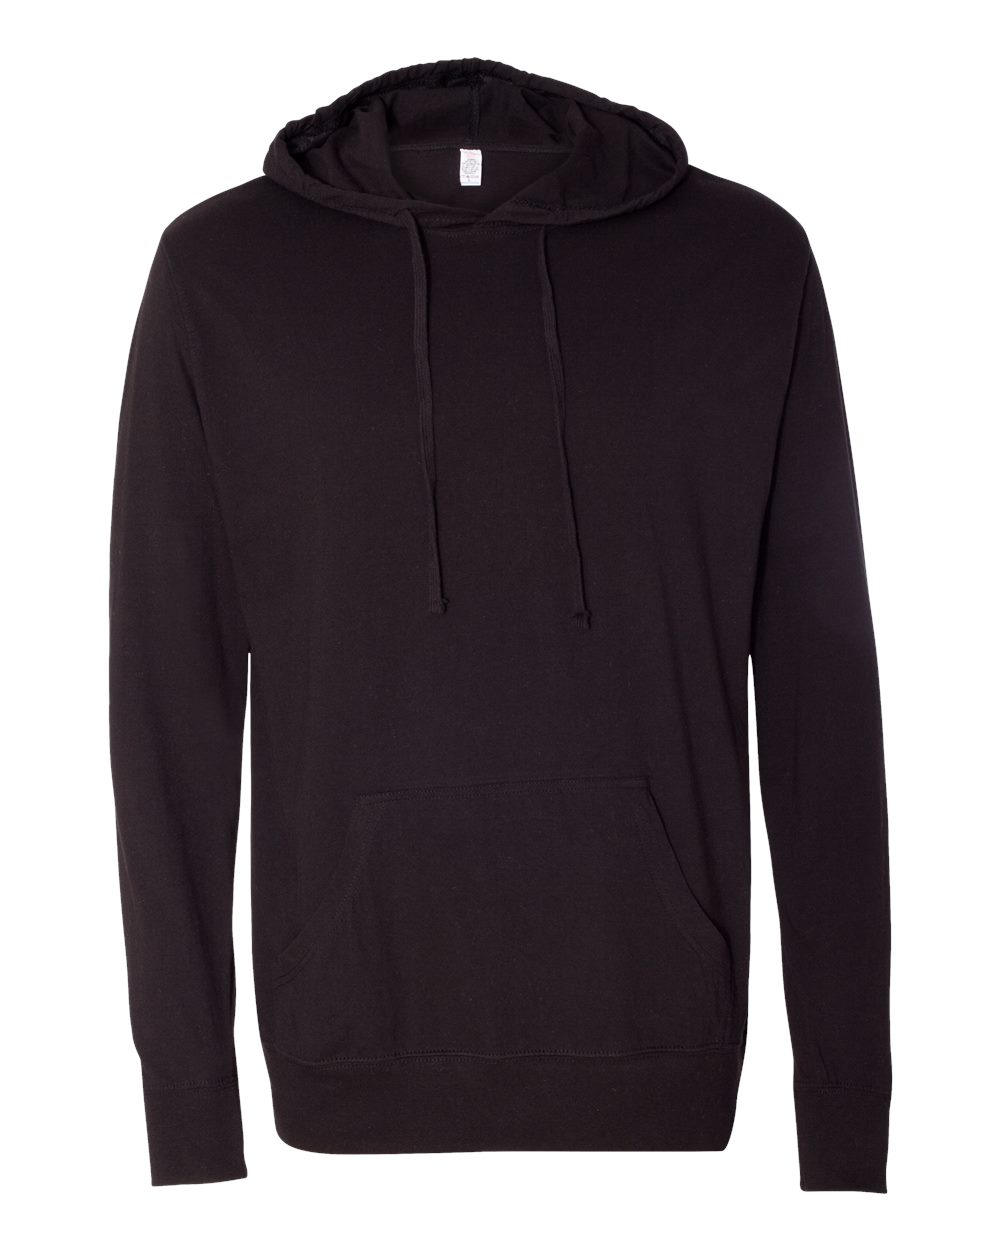 Independent Trading Co. Lightweight Hooded Pullover T-Shirt - SS150J